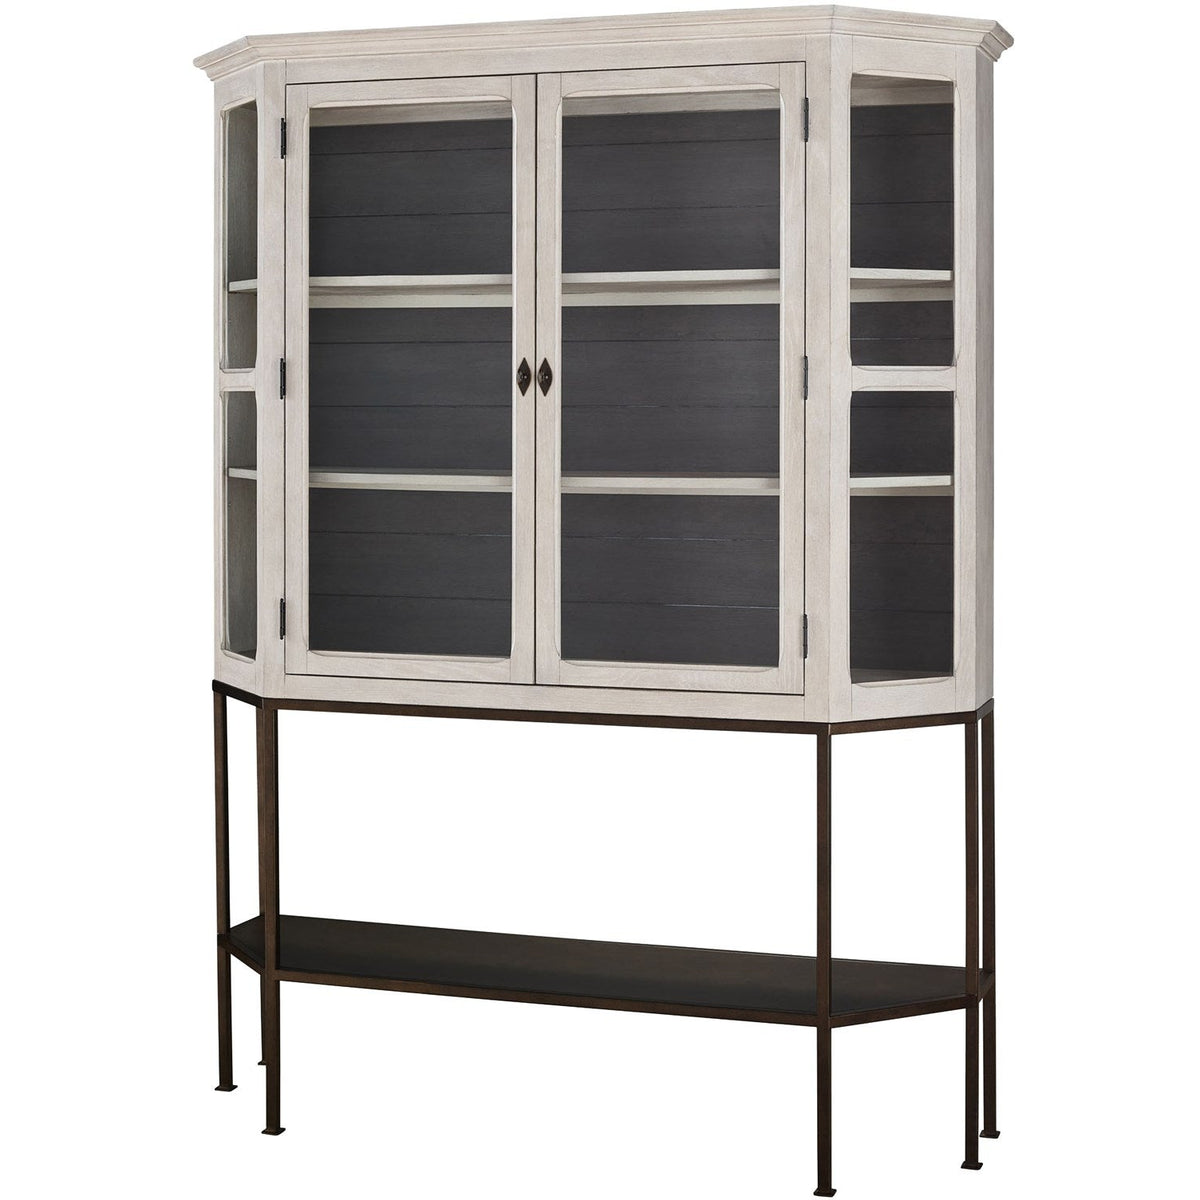 Lawrence Display Cabinet - Be Bold Furniture